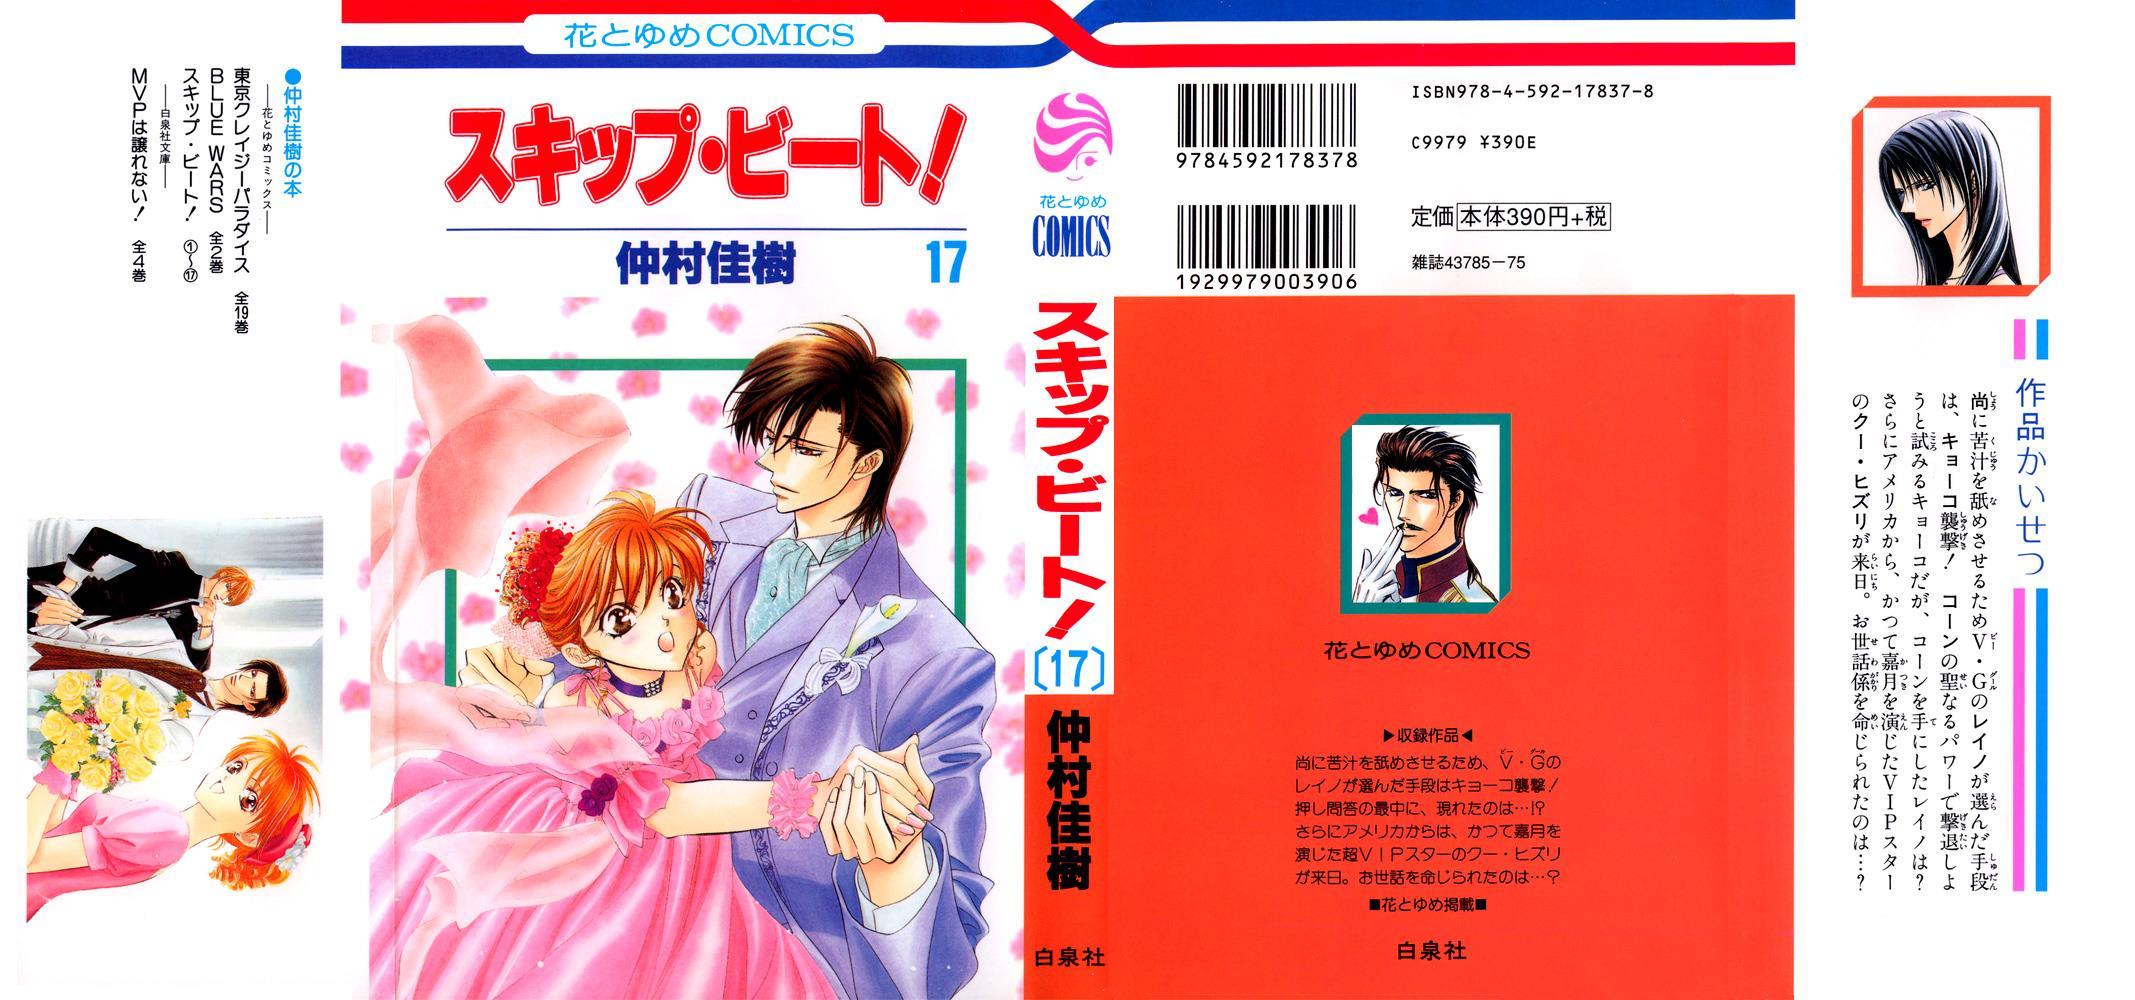 Skip Beat!, Chapter 97 Suddenly, a Love Story- Ending, Part 4 image 02